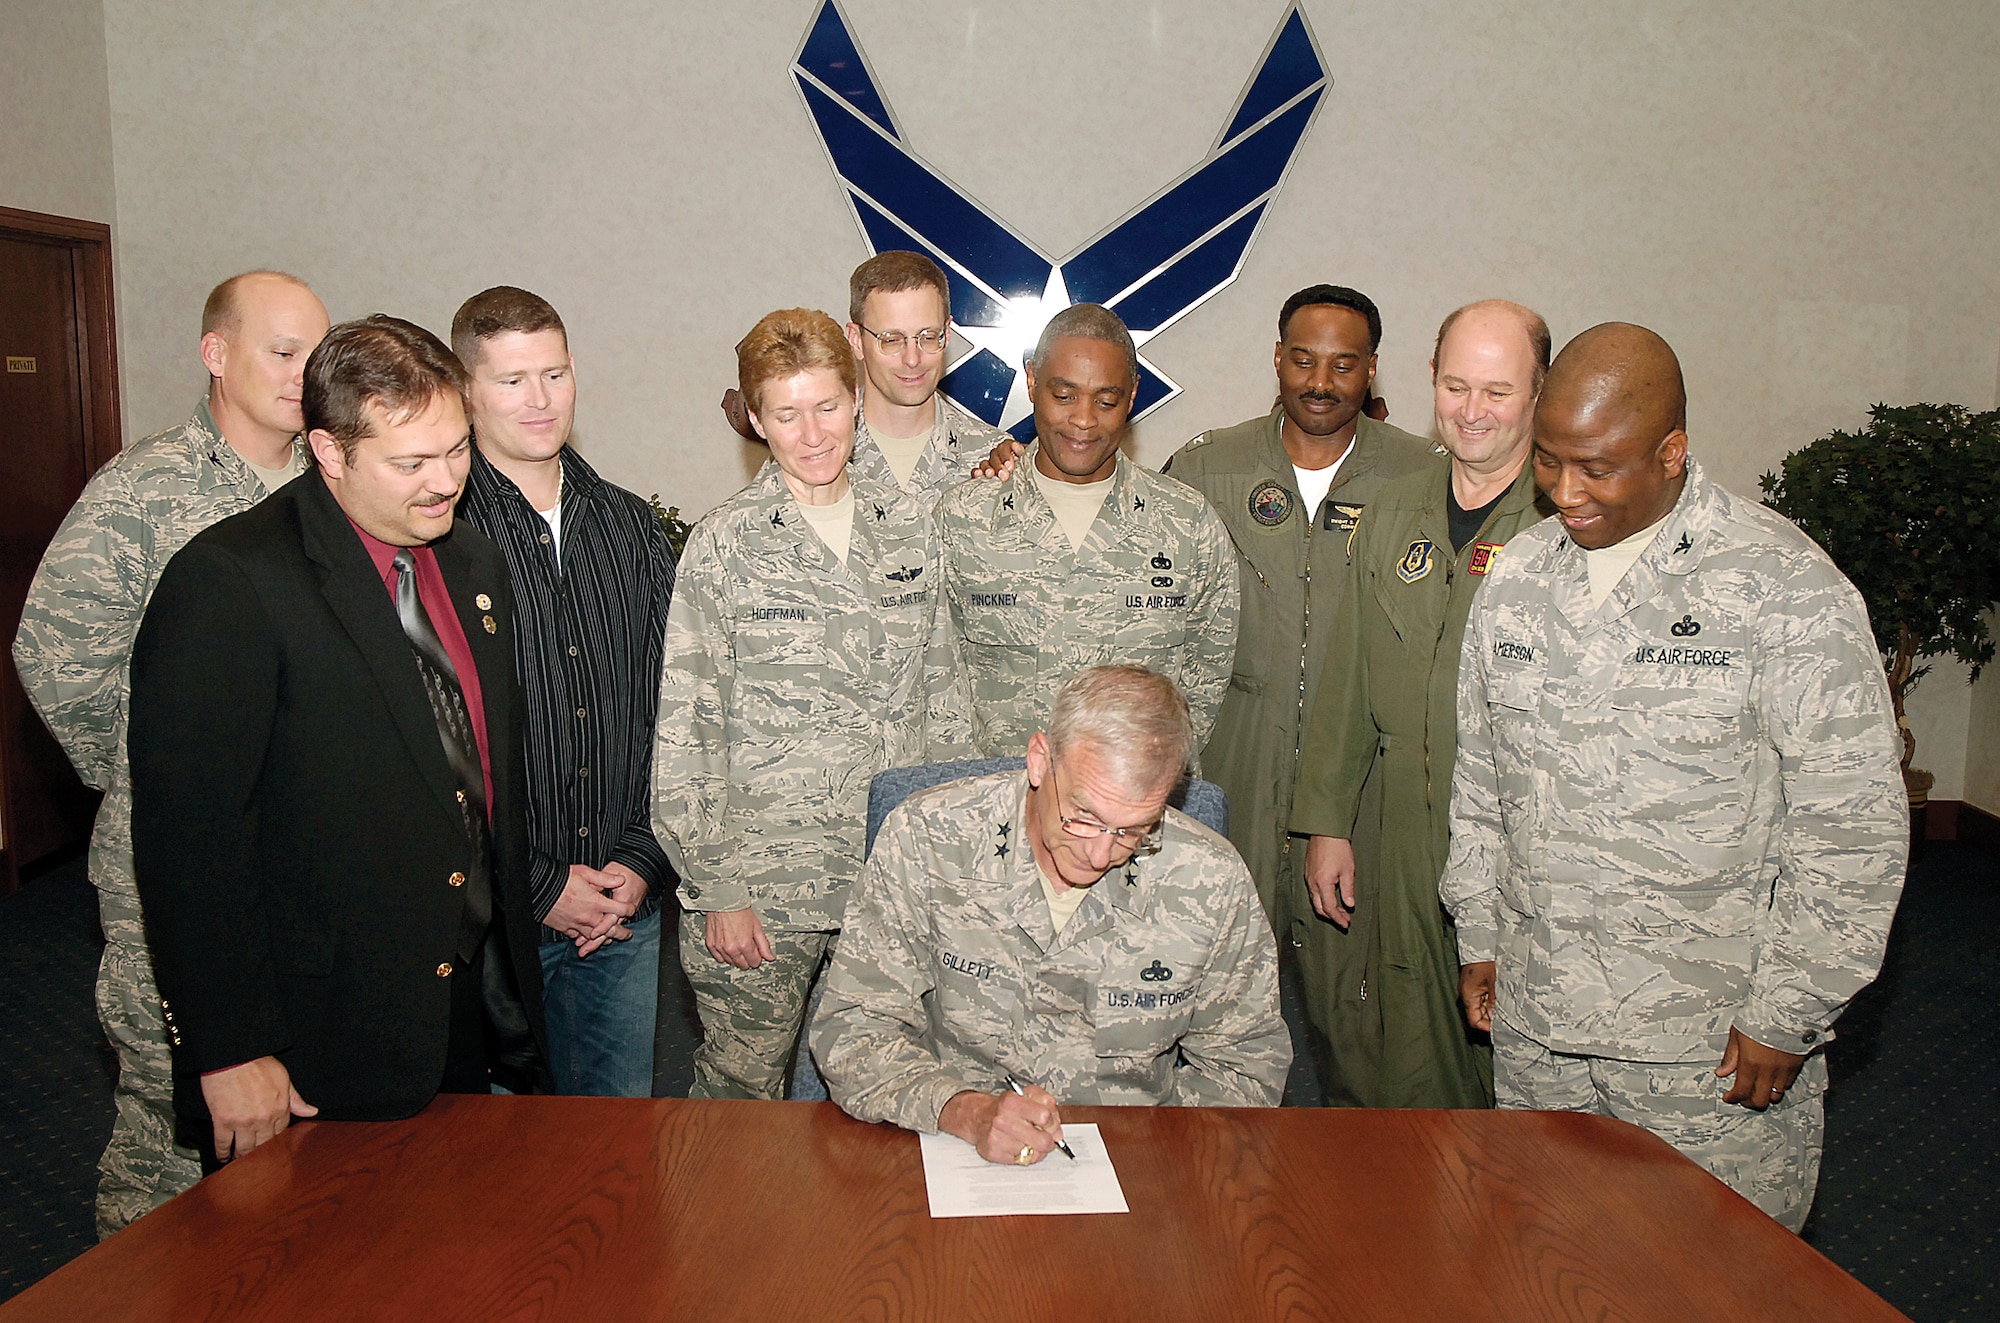 From left to right: Col. Kelly Larson, Defense Logistics Agency Oklahoma City commander; Todd Lambert, International Association of Firefighters F211 Union president; James Schmidt, AFGE Local 916 Union president; Col. Patricia Hoffman, 552nd Air Control Wing commander; Col. Mark Beierle, 327th Aircraft Sustainment Wing commander; Col. Joseph Pinckney, 448th Supply Chain Management Wing vice commander; Navy Capt. Dwight Shepherd, Strategic Communications Wing ONE commander; Col. Jeffery Glass, 507th Air Refueling Wing commander; and Col. Allen Jamerson, 72nd Air Base Wing commander; look on as Maj. Gen. David Gillett, Oklahoma City Air Logistics Center commander, signs an Energy Awareness Month proclamation. A copy of the proclamation is available on Page 18. To participate in your own event, cut it out, post it and sign it. (Air Force photo by Kelly White) 